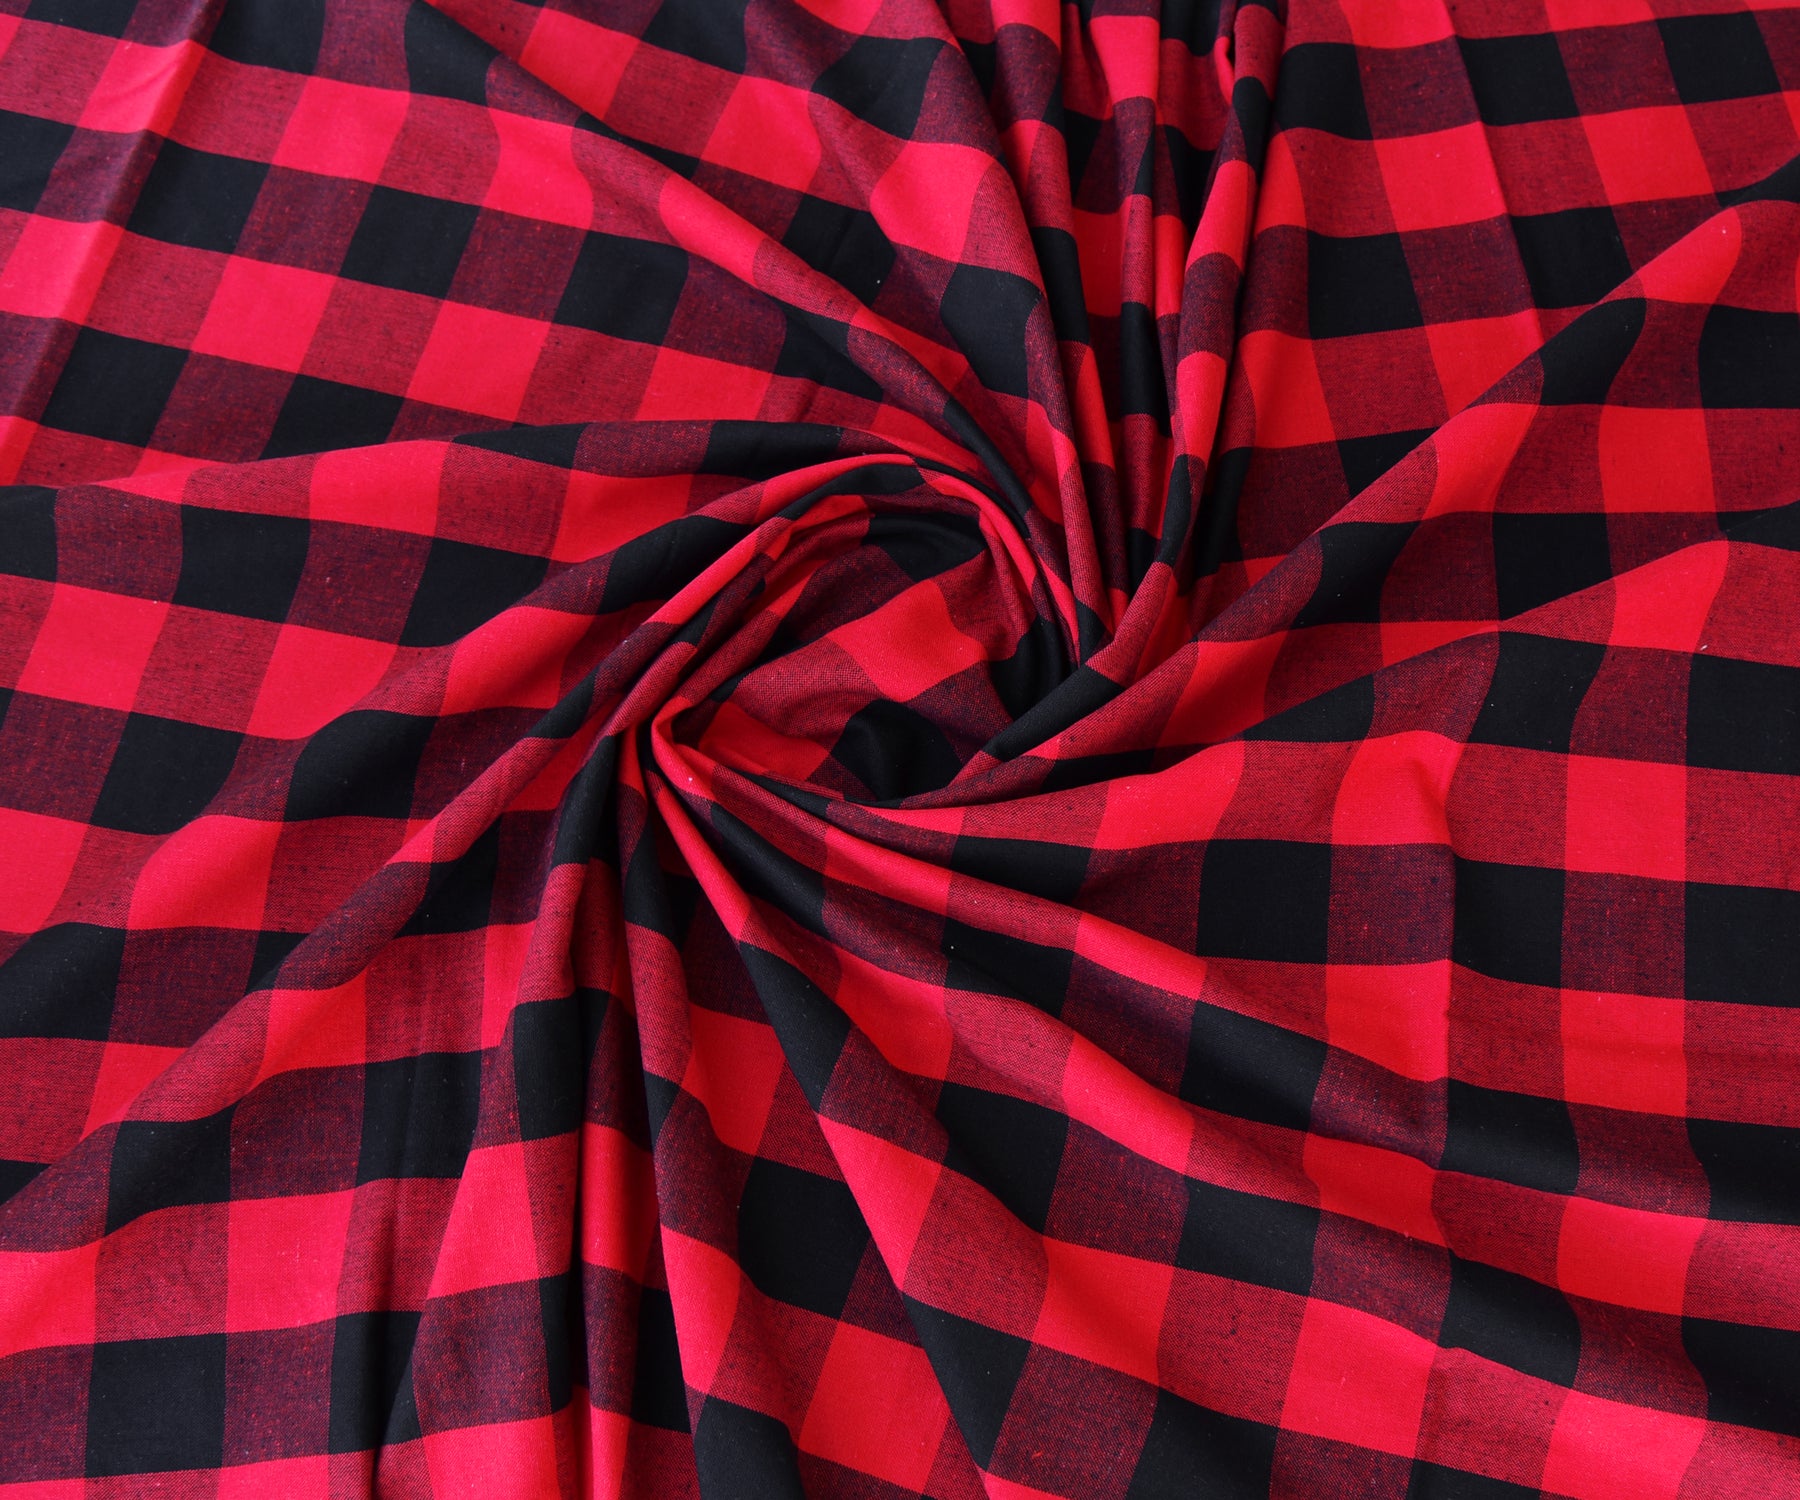 Our red cloth tablecloth has made the Size 63 X 120" with Red and Black Color 2" checkboxes.